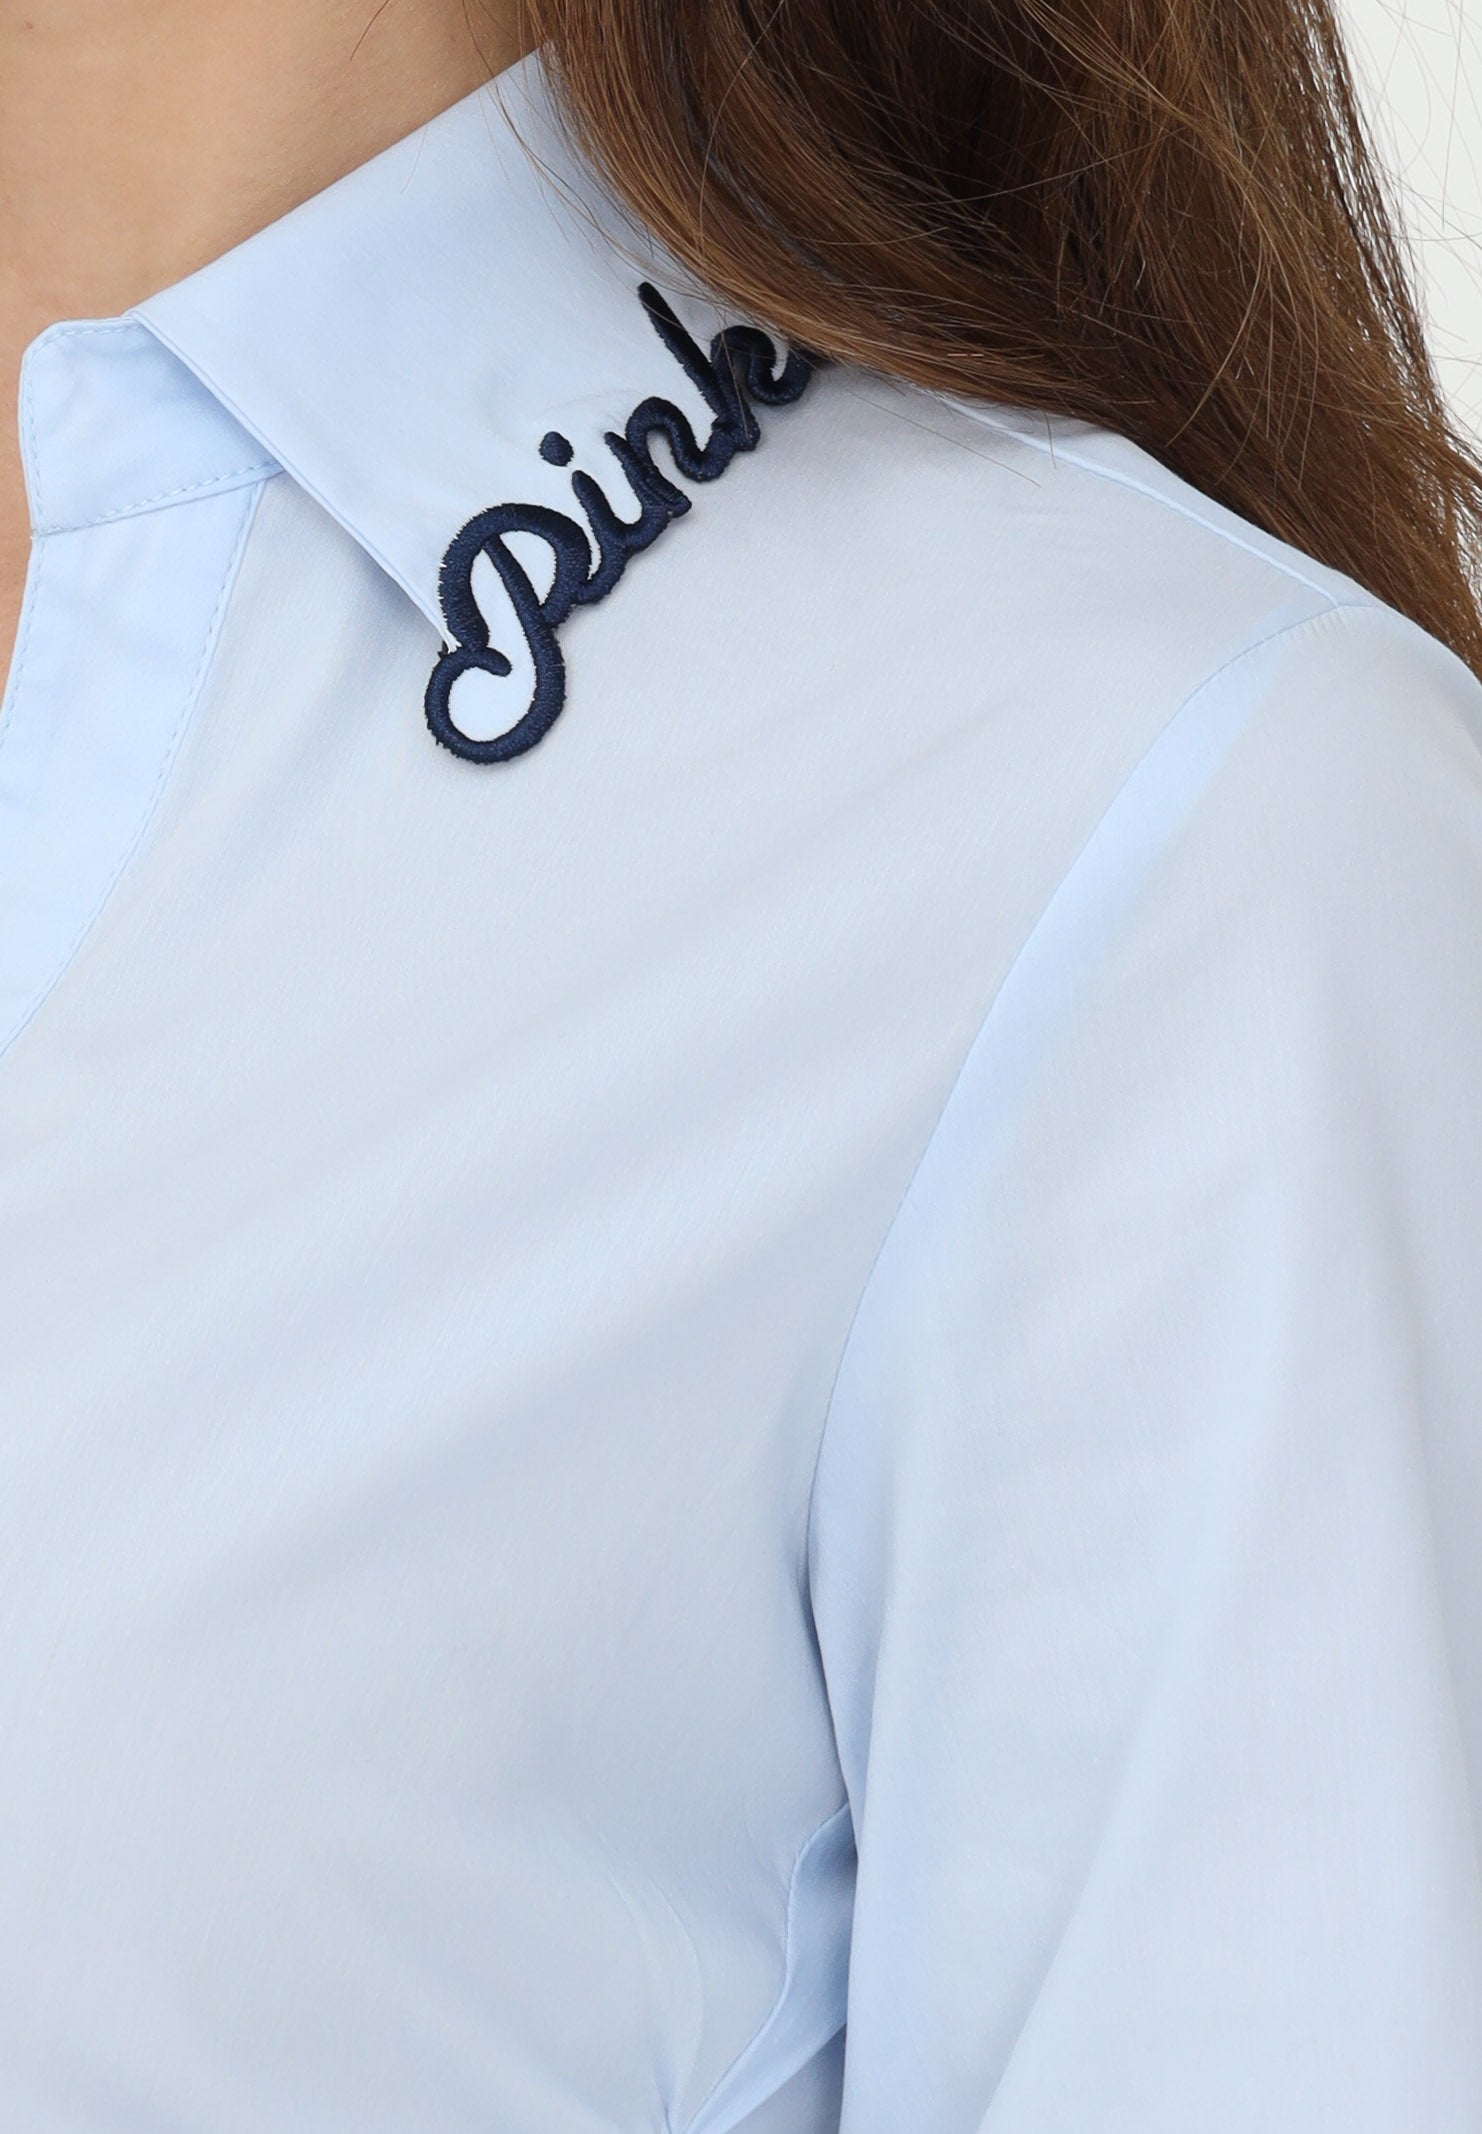 Pinko Light Blue Shirt with Navy Logo Collar Embroidery